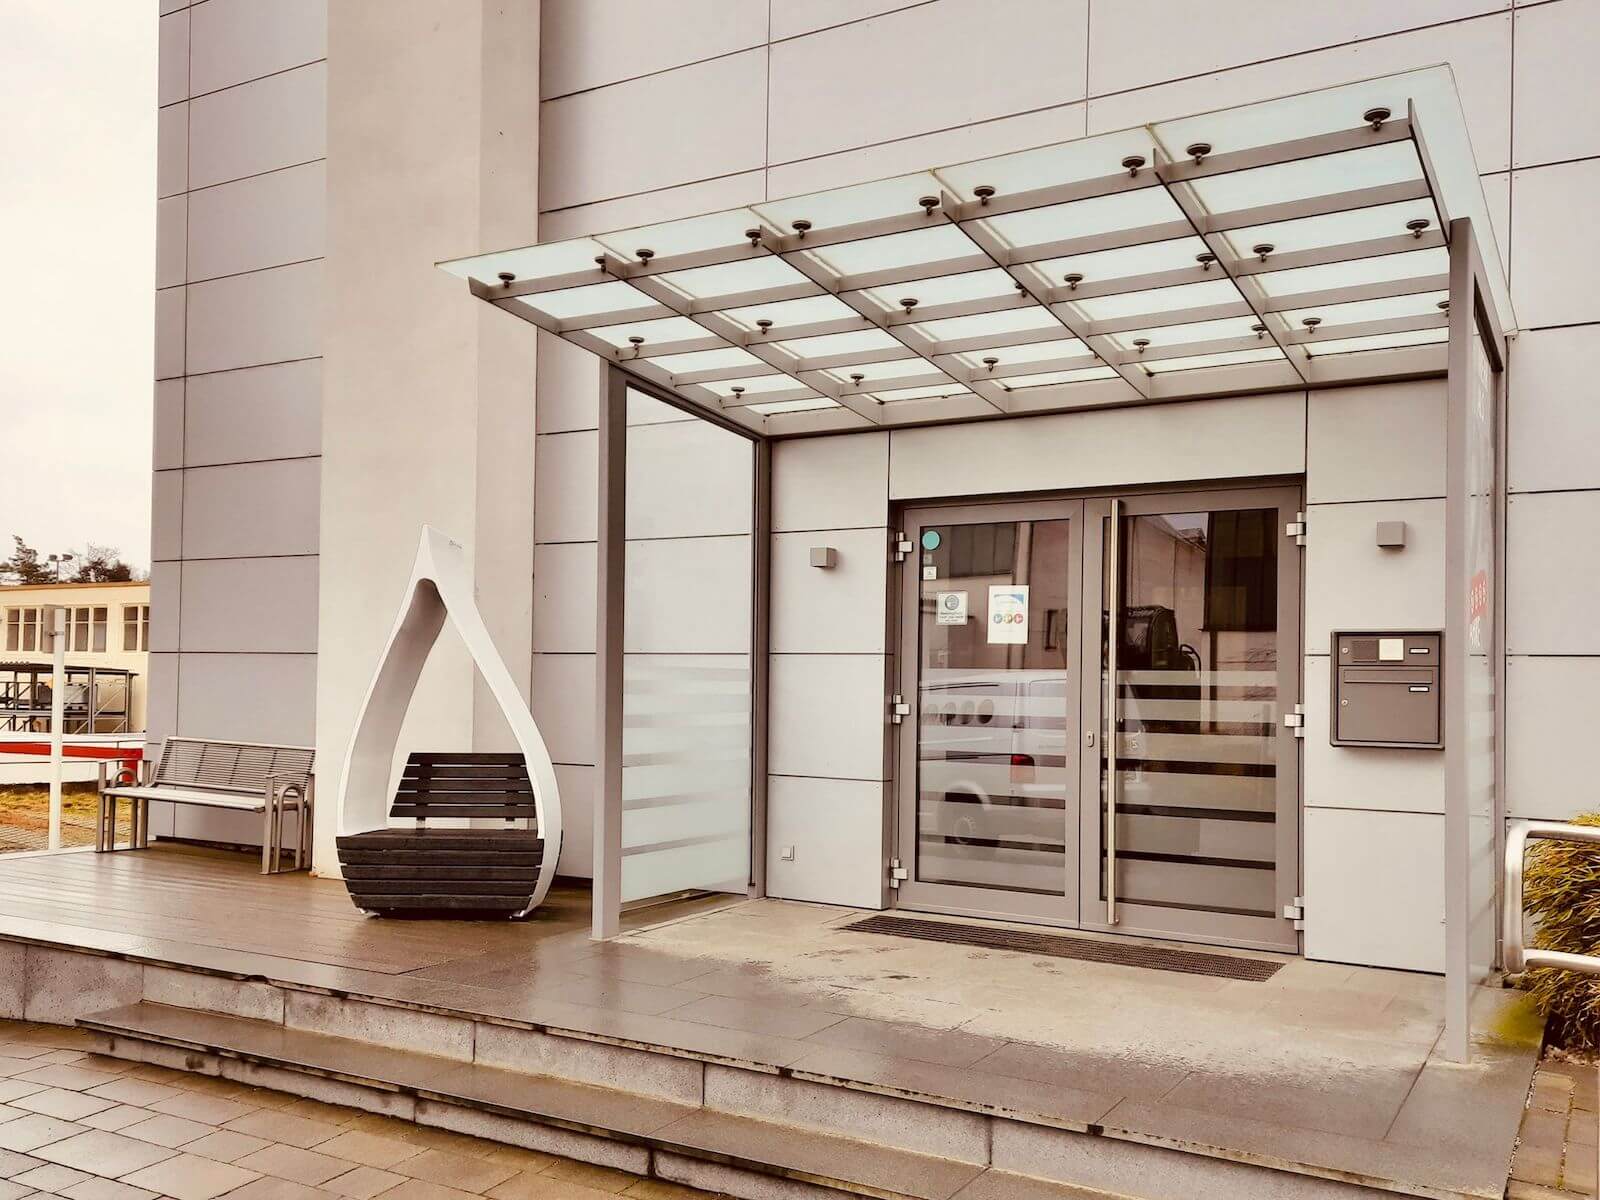 The front of a building with glass doors and a metal canopy at the top of two concrete steps.